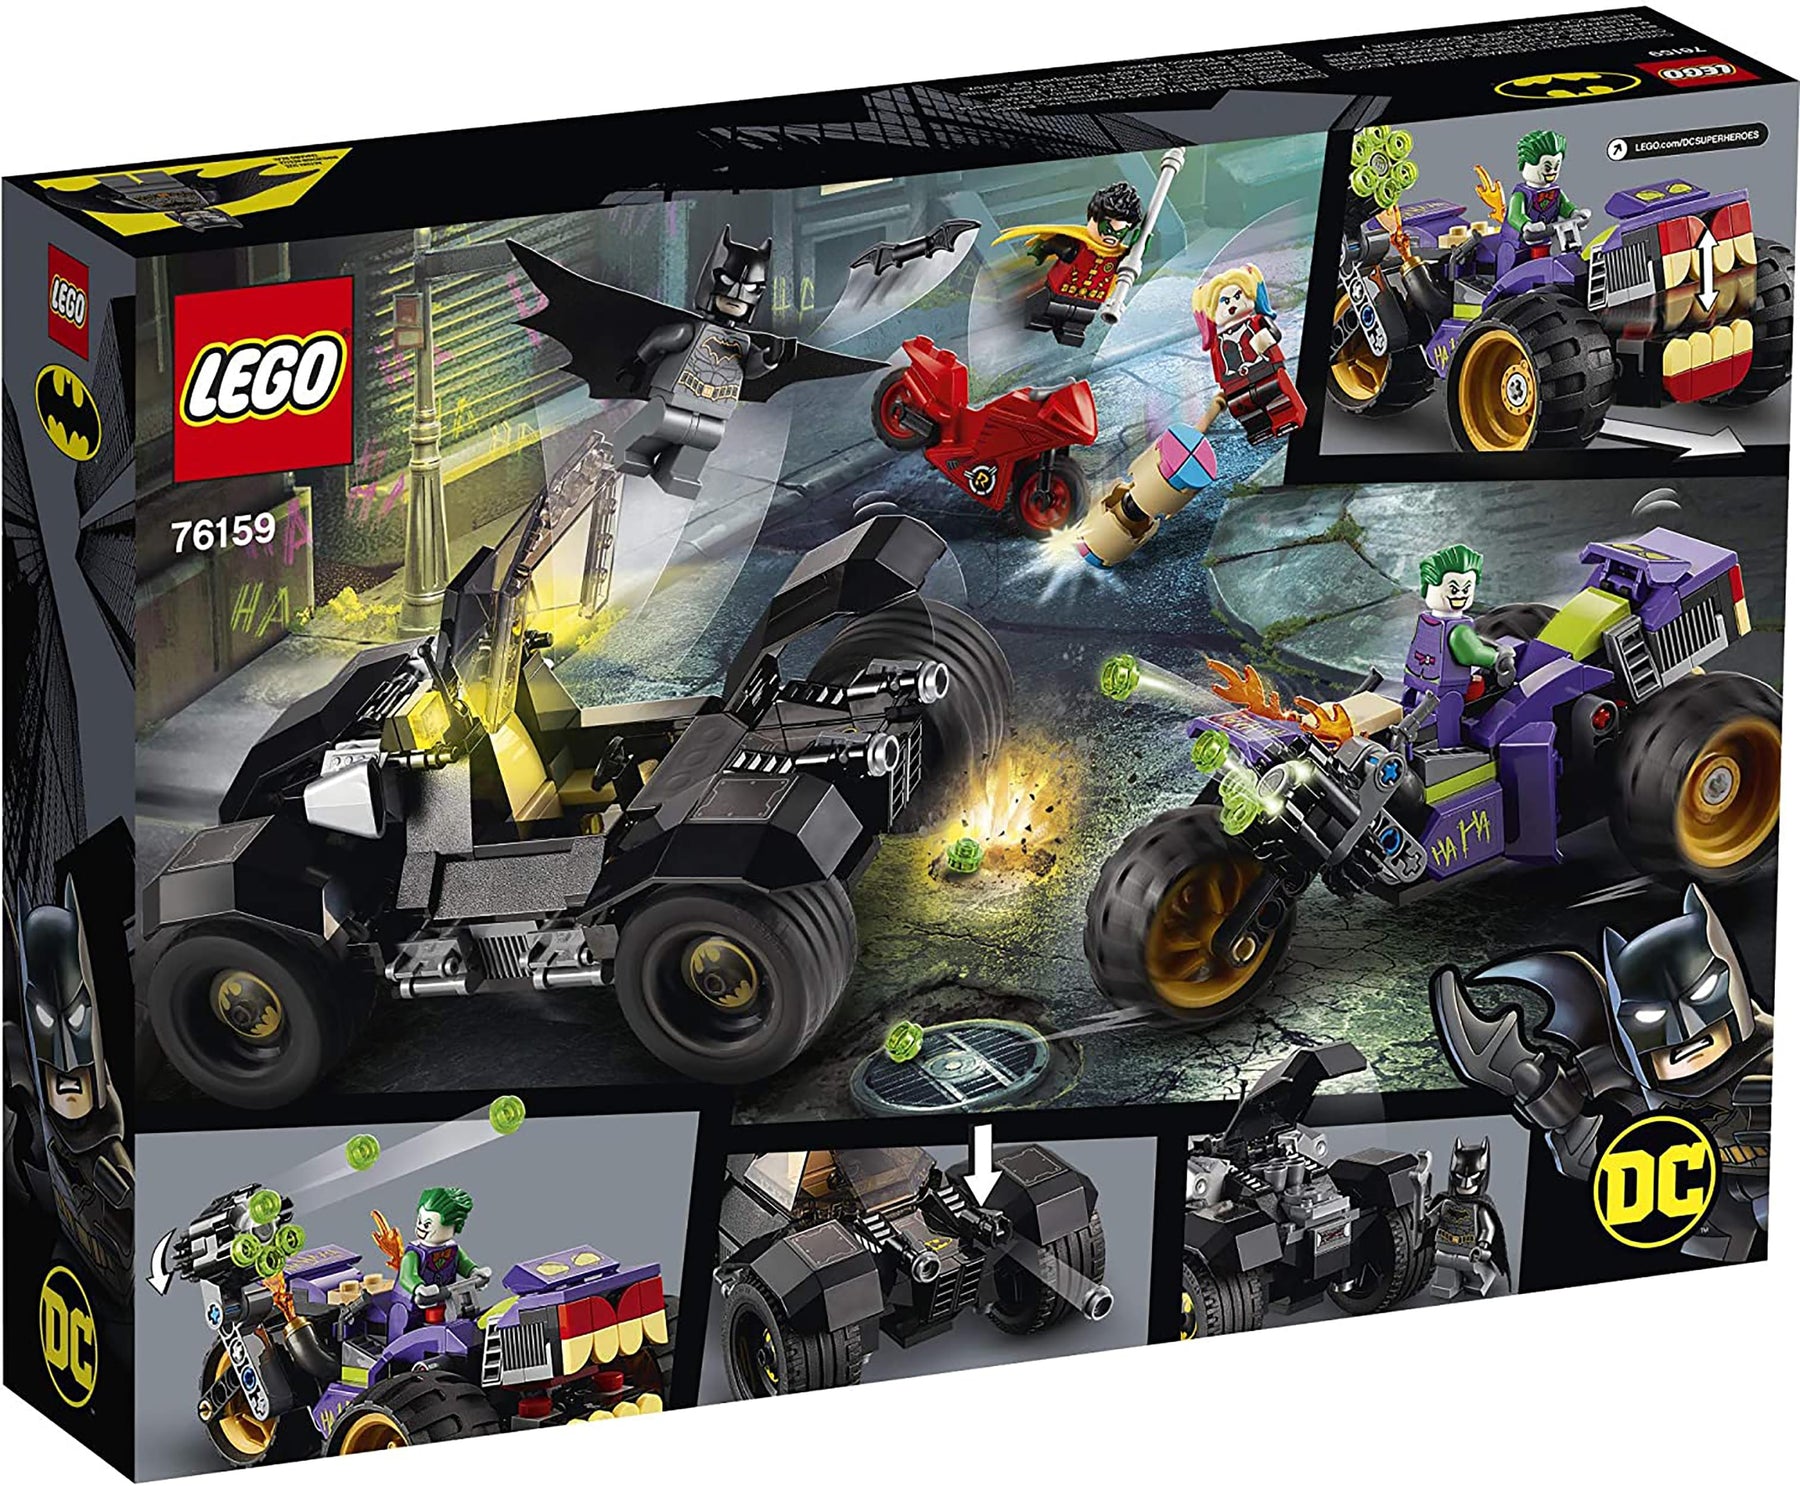 LEGO DC Super Heroes 76159 Jokers Trike Chase 440 Piece Building Kit